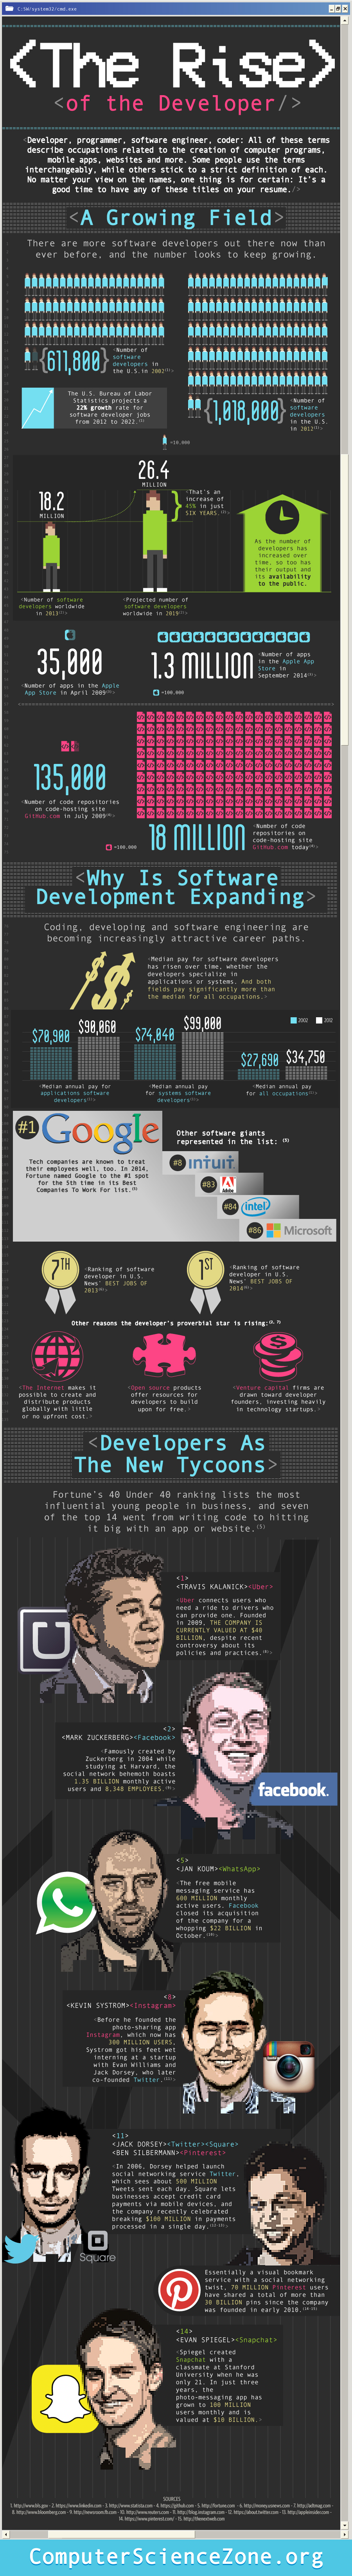 The Rise of the Developer